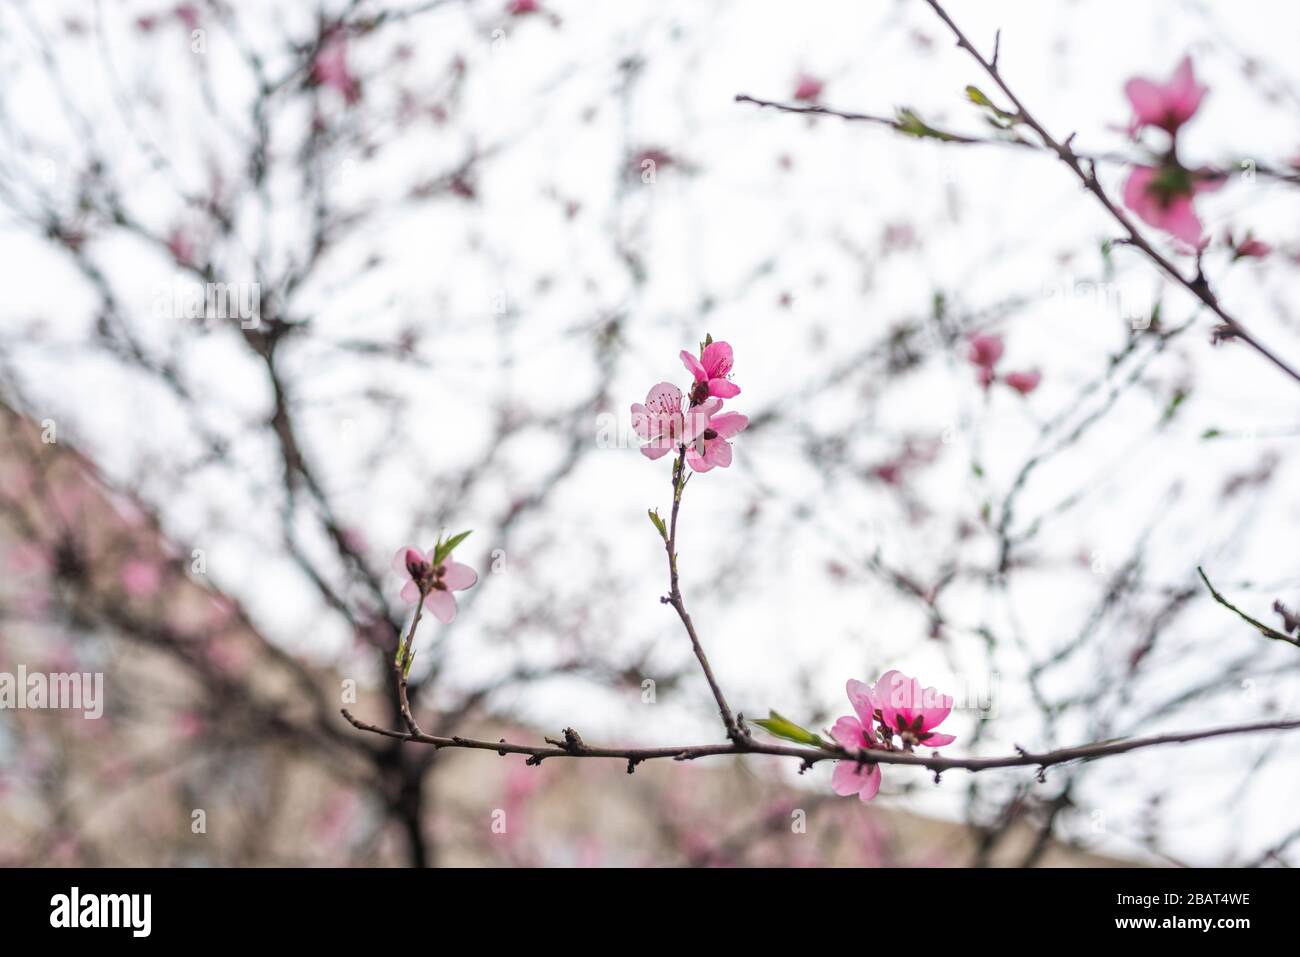 Wild cherry or cherry blossoms in the spring season. Branches on a tree against the sky. Pink flowers Stock Photo